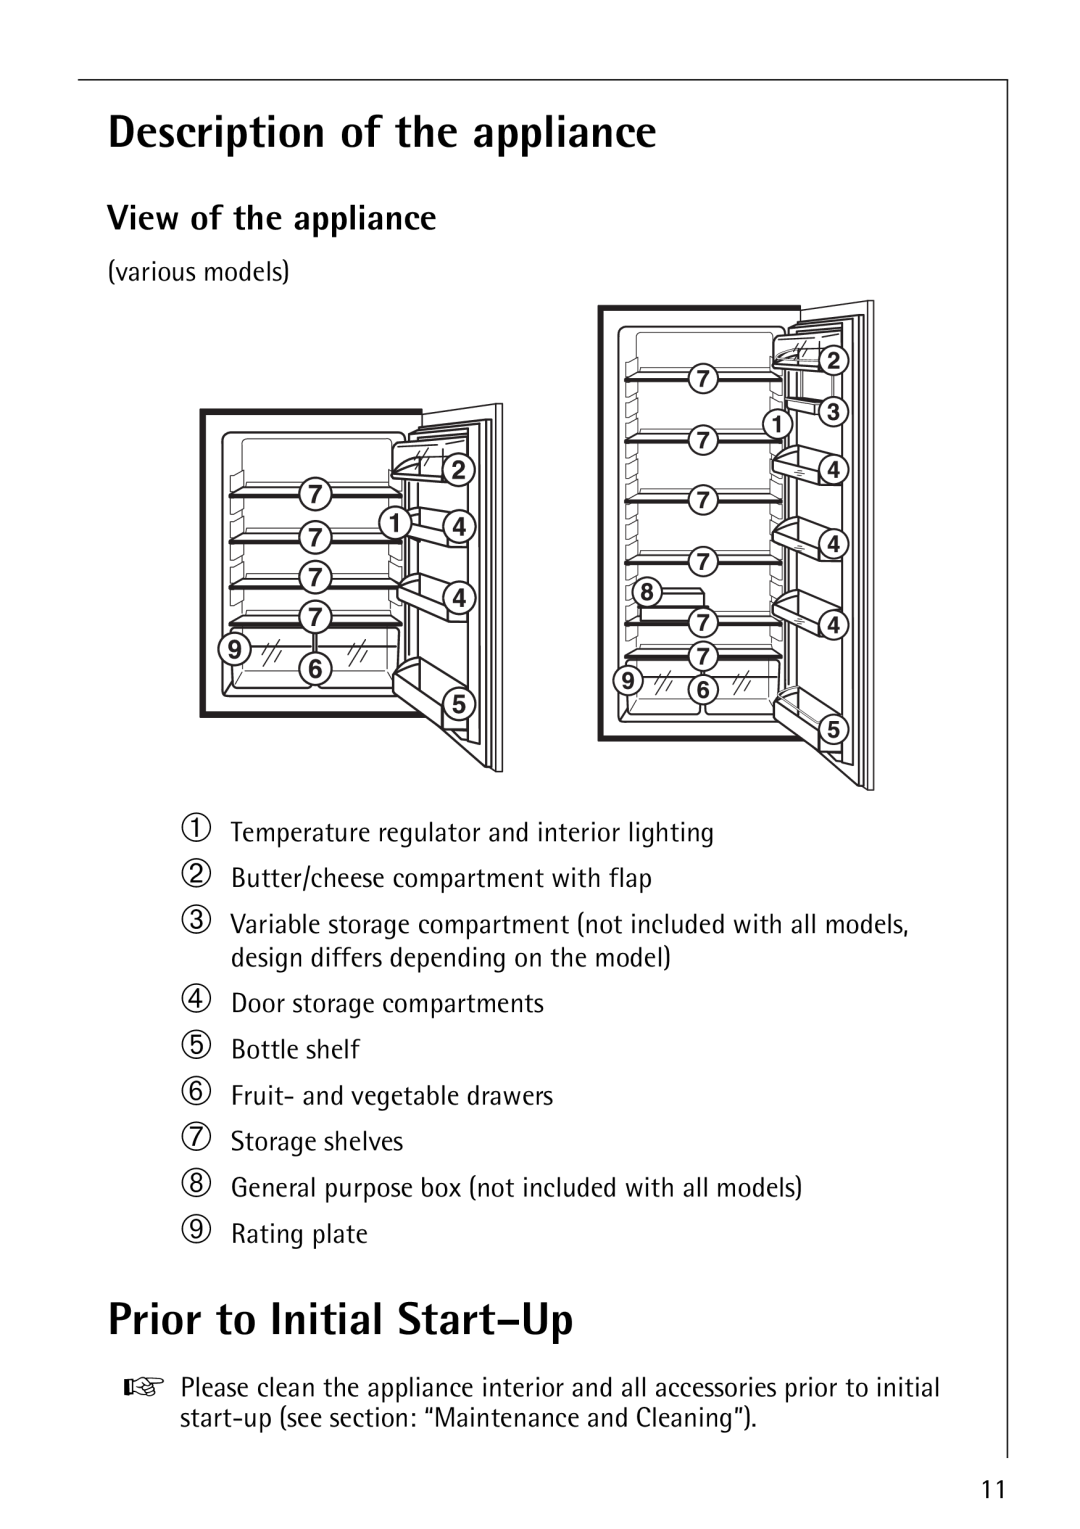 Electrolux Integrated operating instructions Description of the appliance, Prior to Initial Start-Up, View of the appliance 